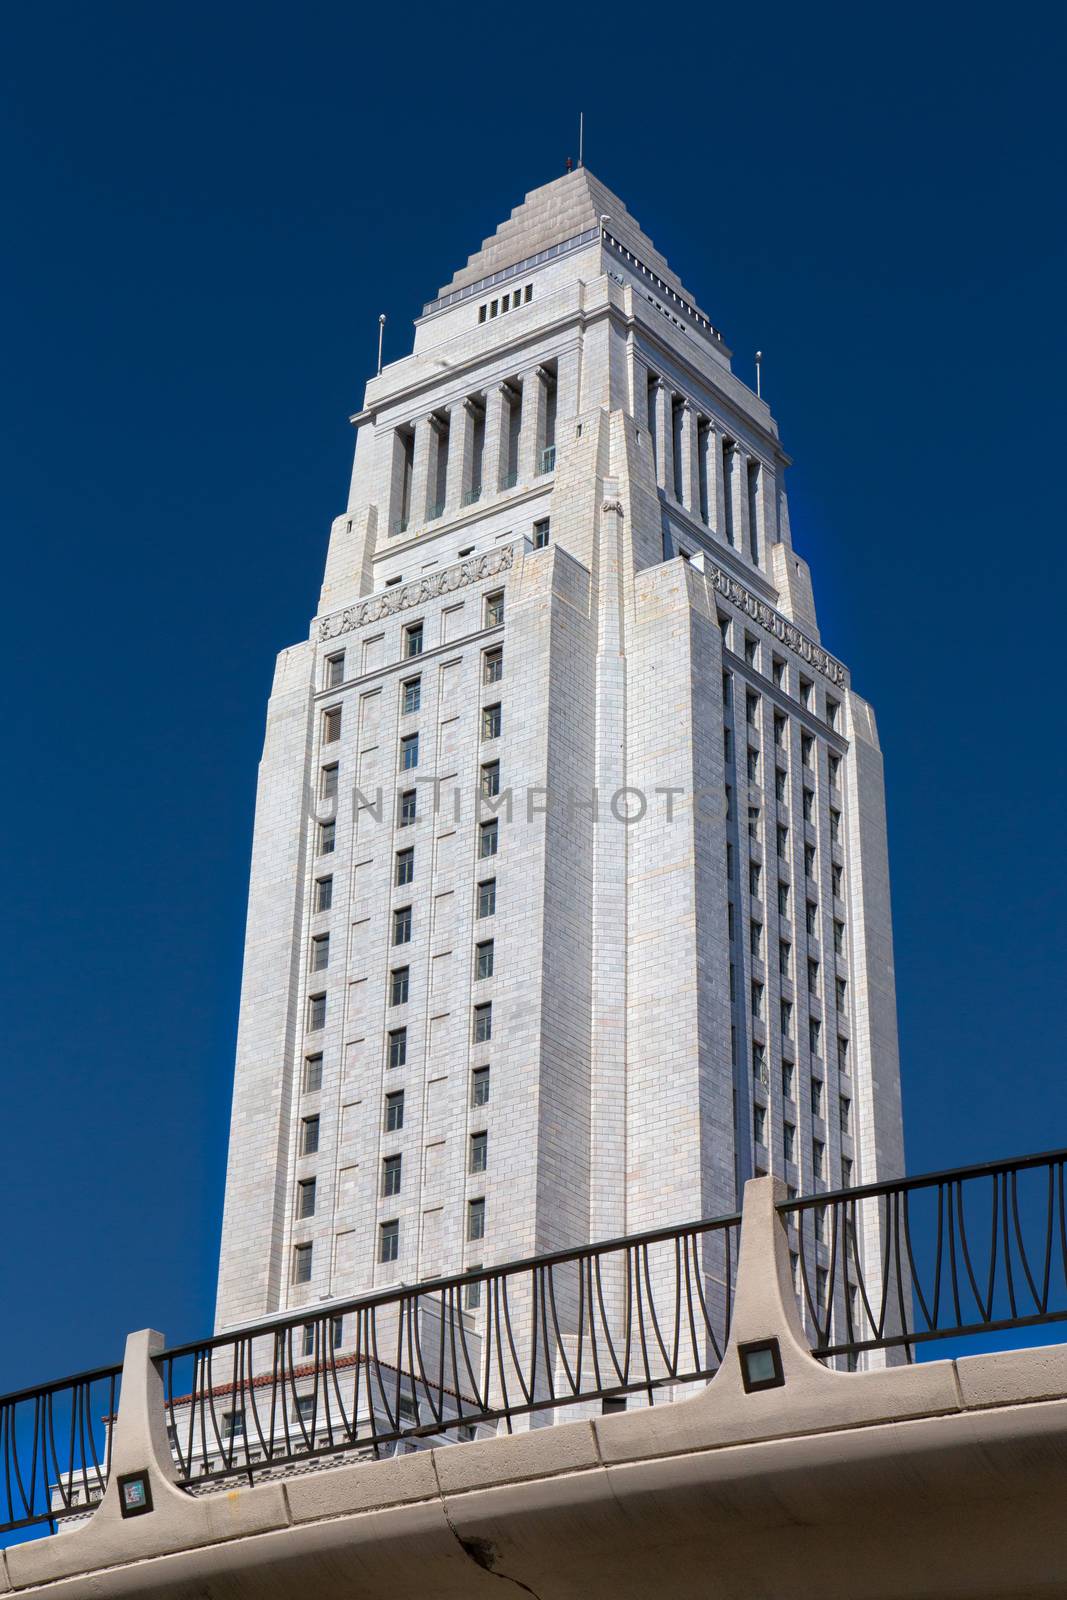 LOS ANGELES, CA/USA - SEPTEMBER 30, 2014: Los Angeles City Hall. Los Angeles City Hall houses the mayor's office and the meeting chambers and offices of the Los Angeles City Council.